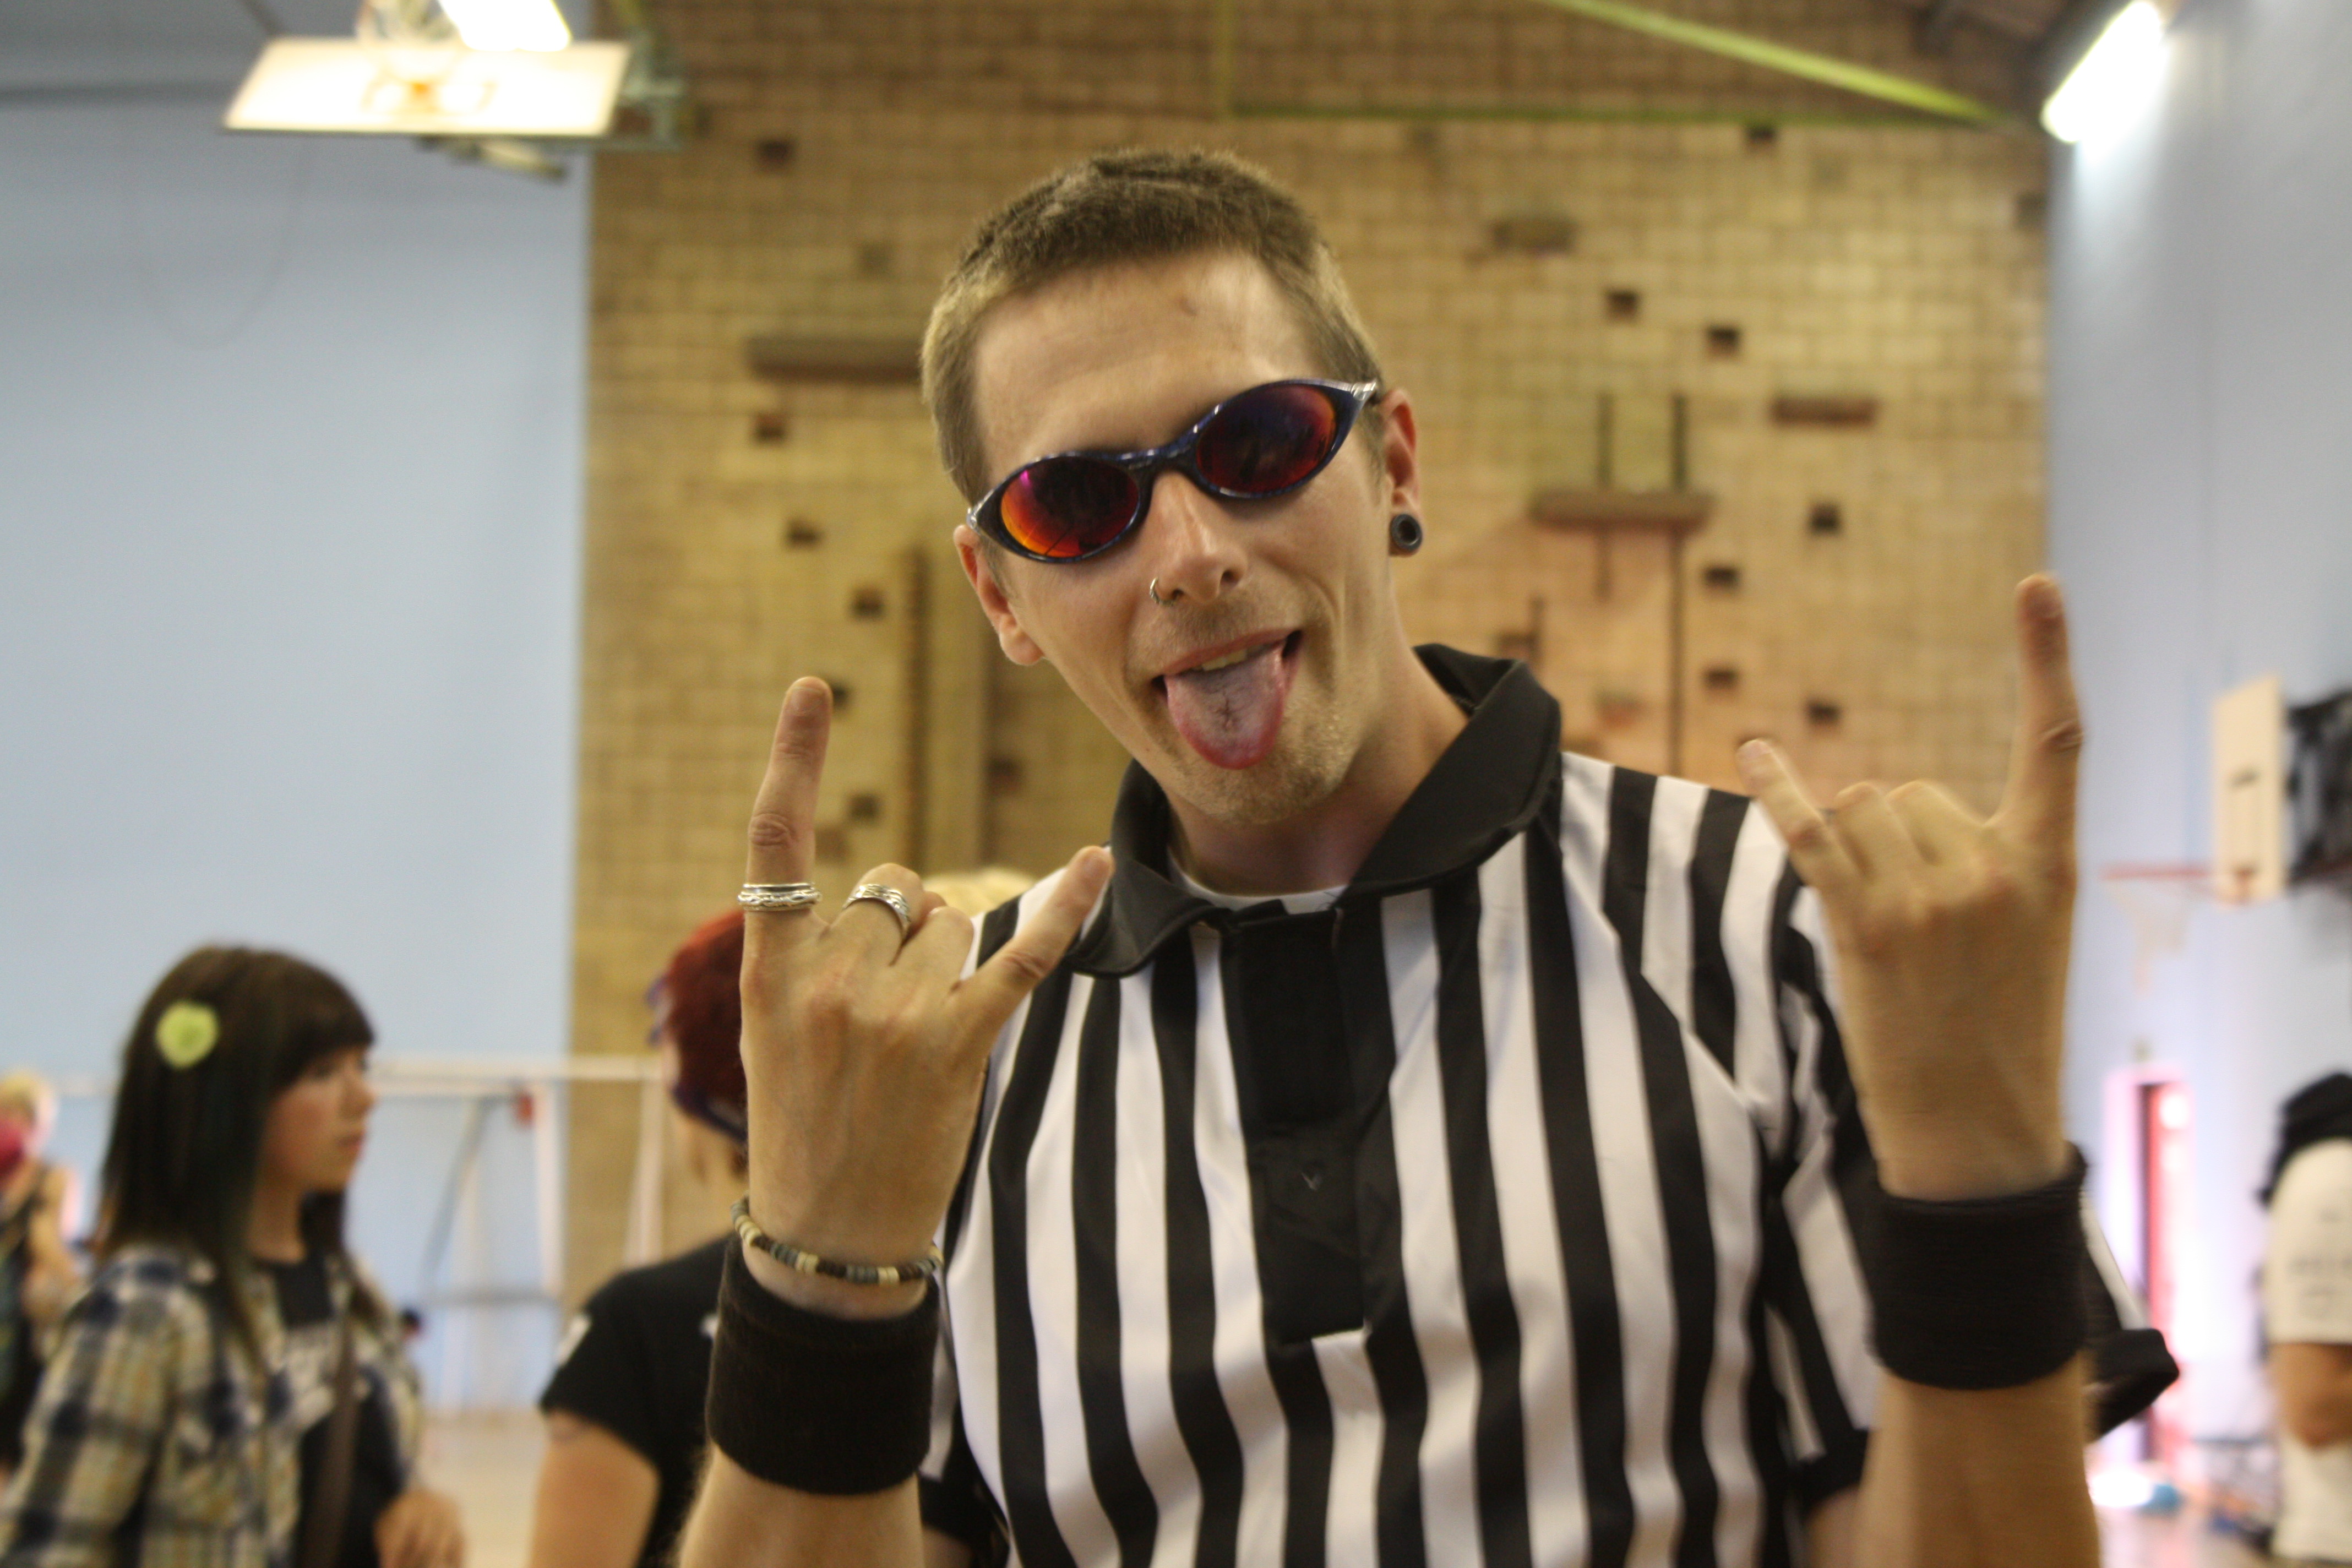 Our referee Rex Pistols